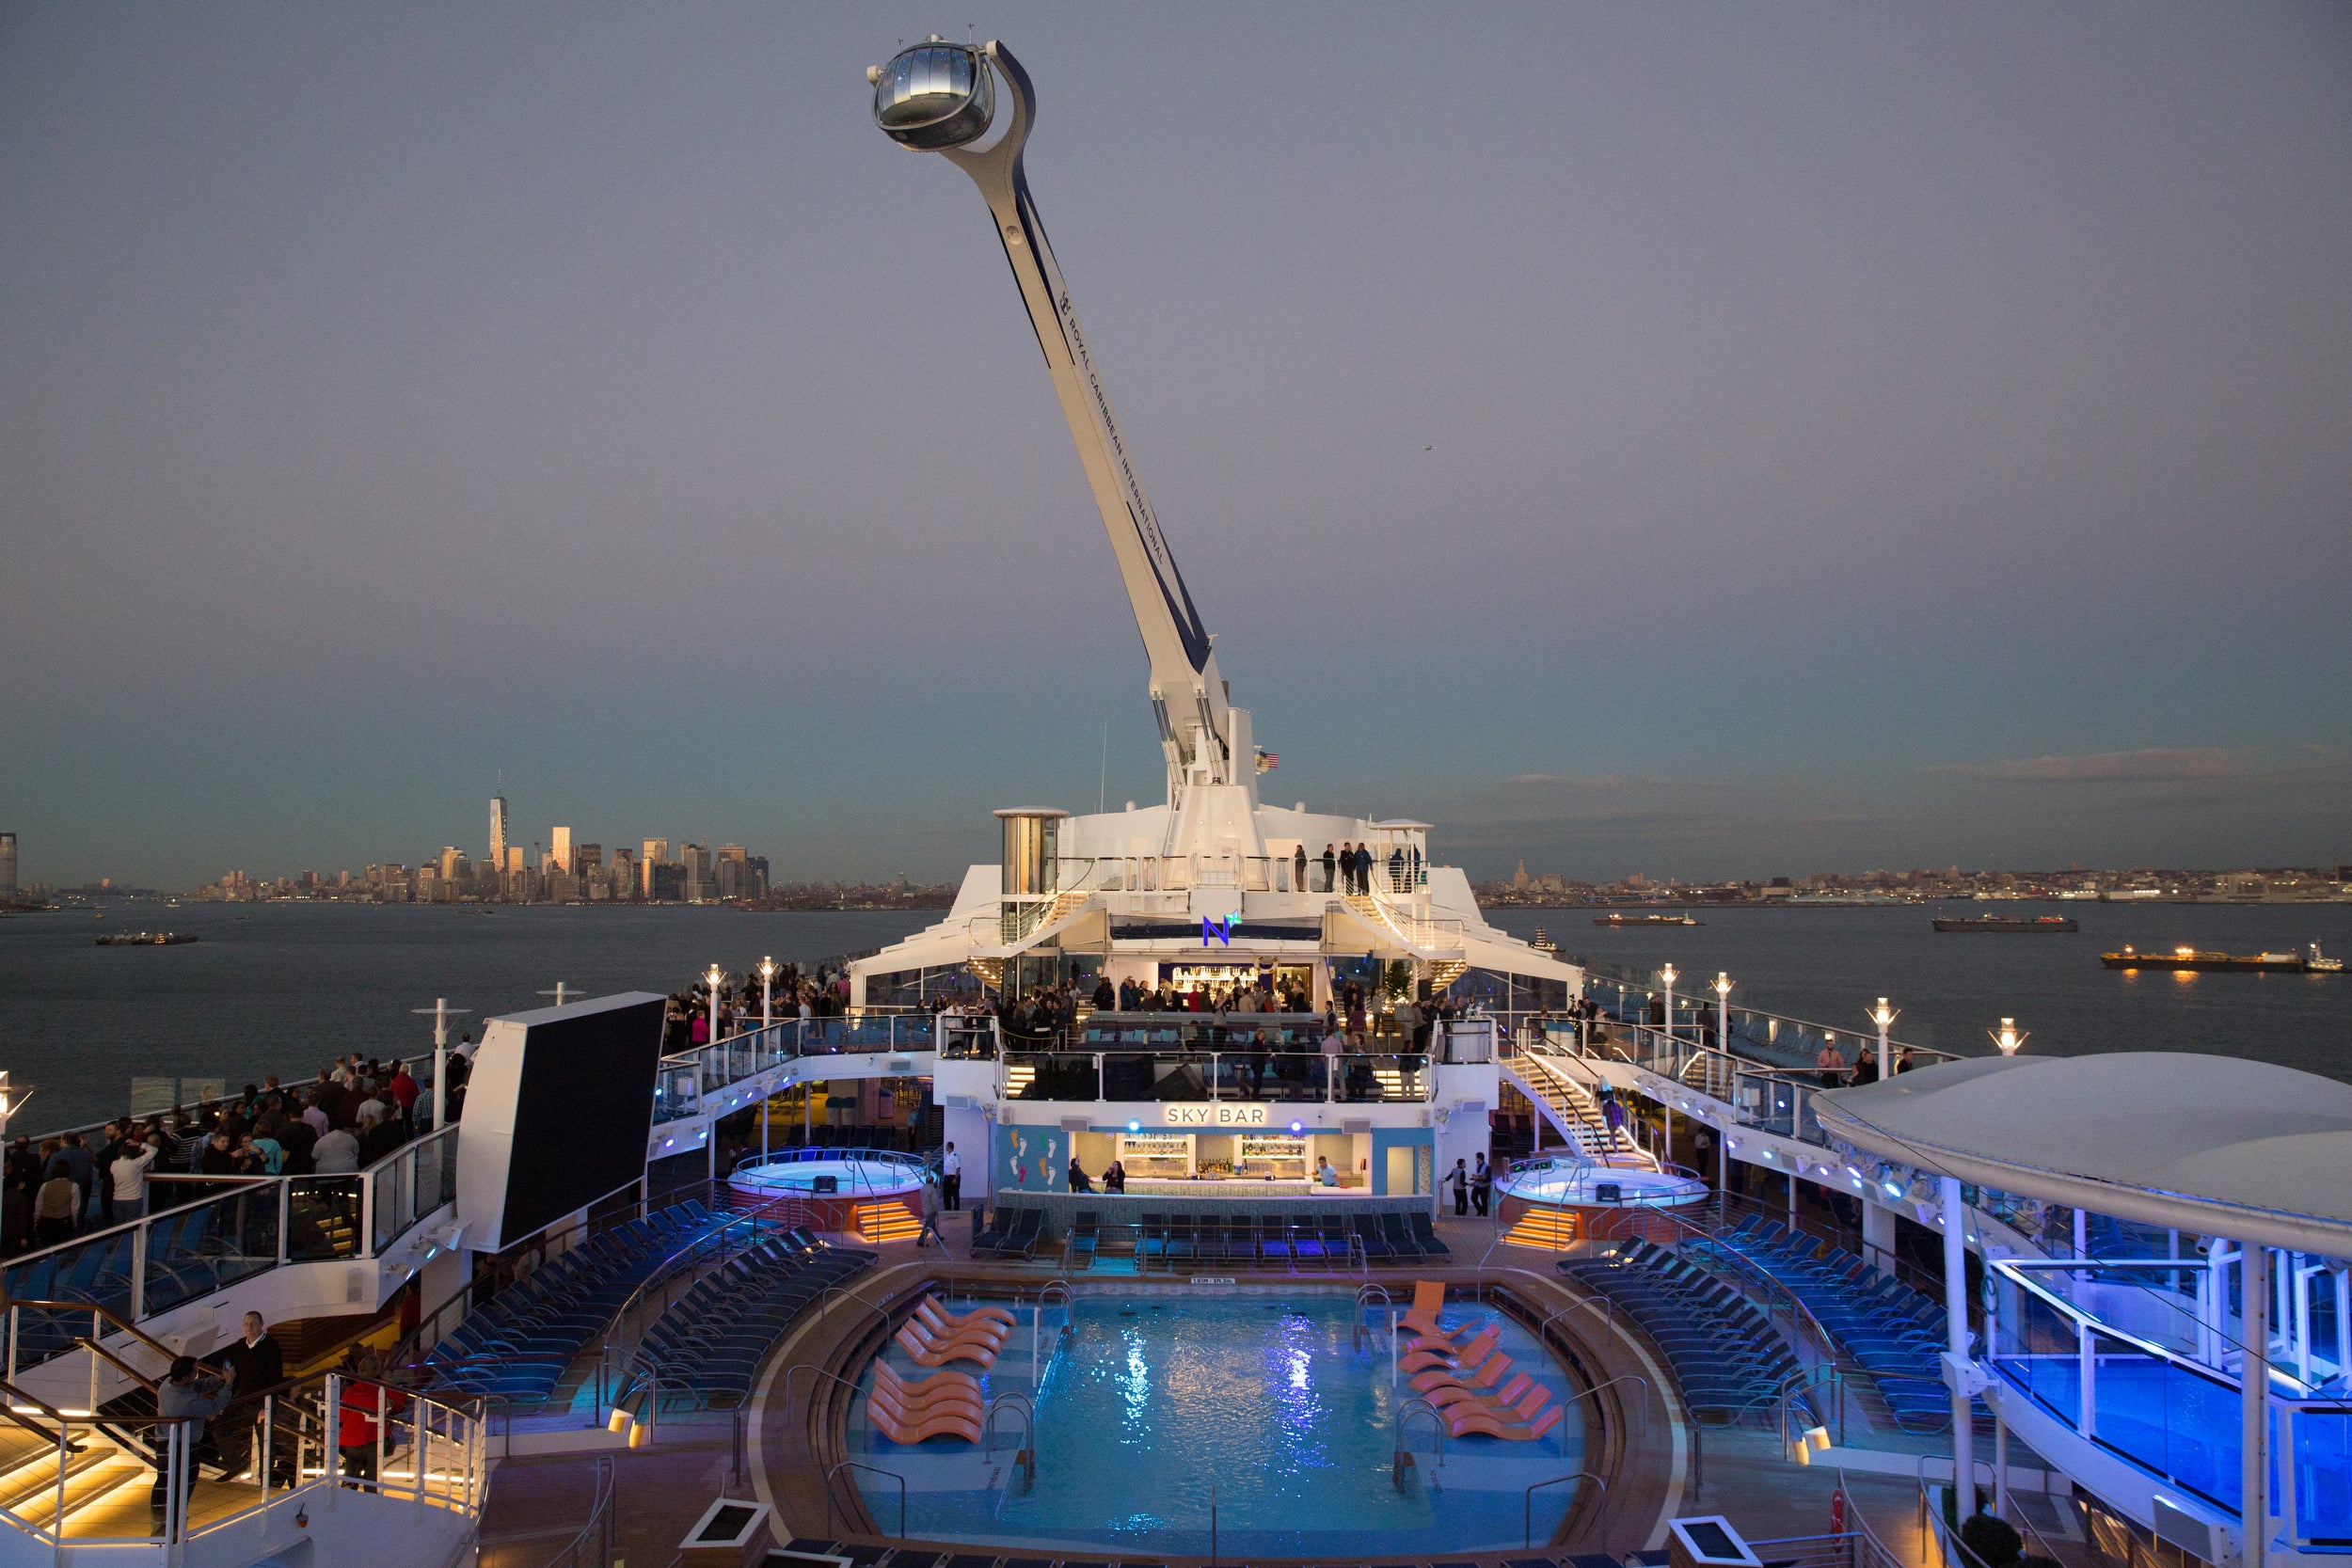 Photos Show the Difference Between Carnival and Royal Caribbean Ships